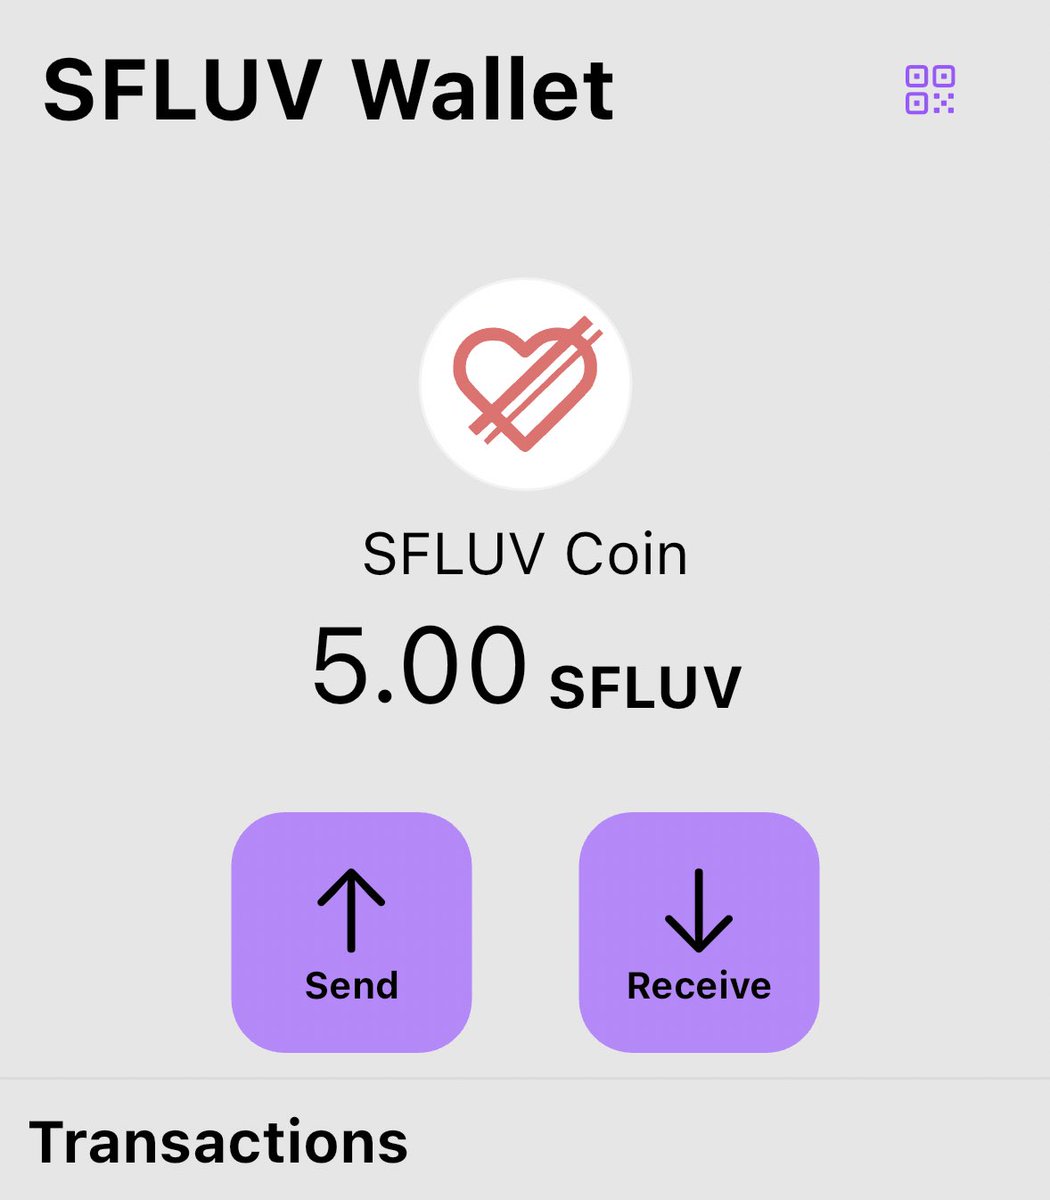 Exciting times 🌟 at INTNCITY as we just launched our first local digital currency @SFLuvCoin to compliment our local community development DOA—with creator / founder @billyriggs making one of the first transactions to buy a cup of coffee ☕️.